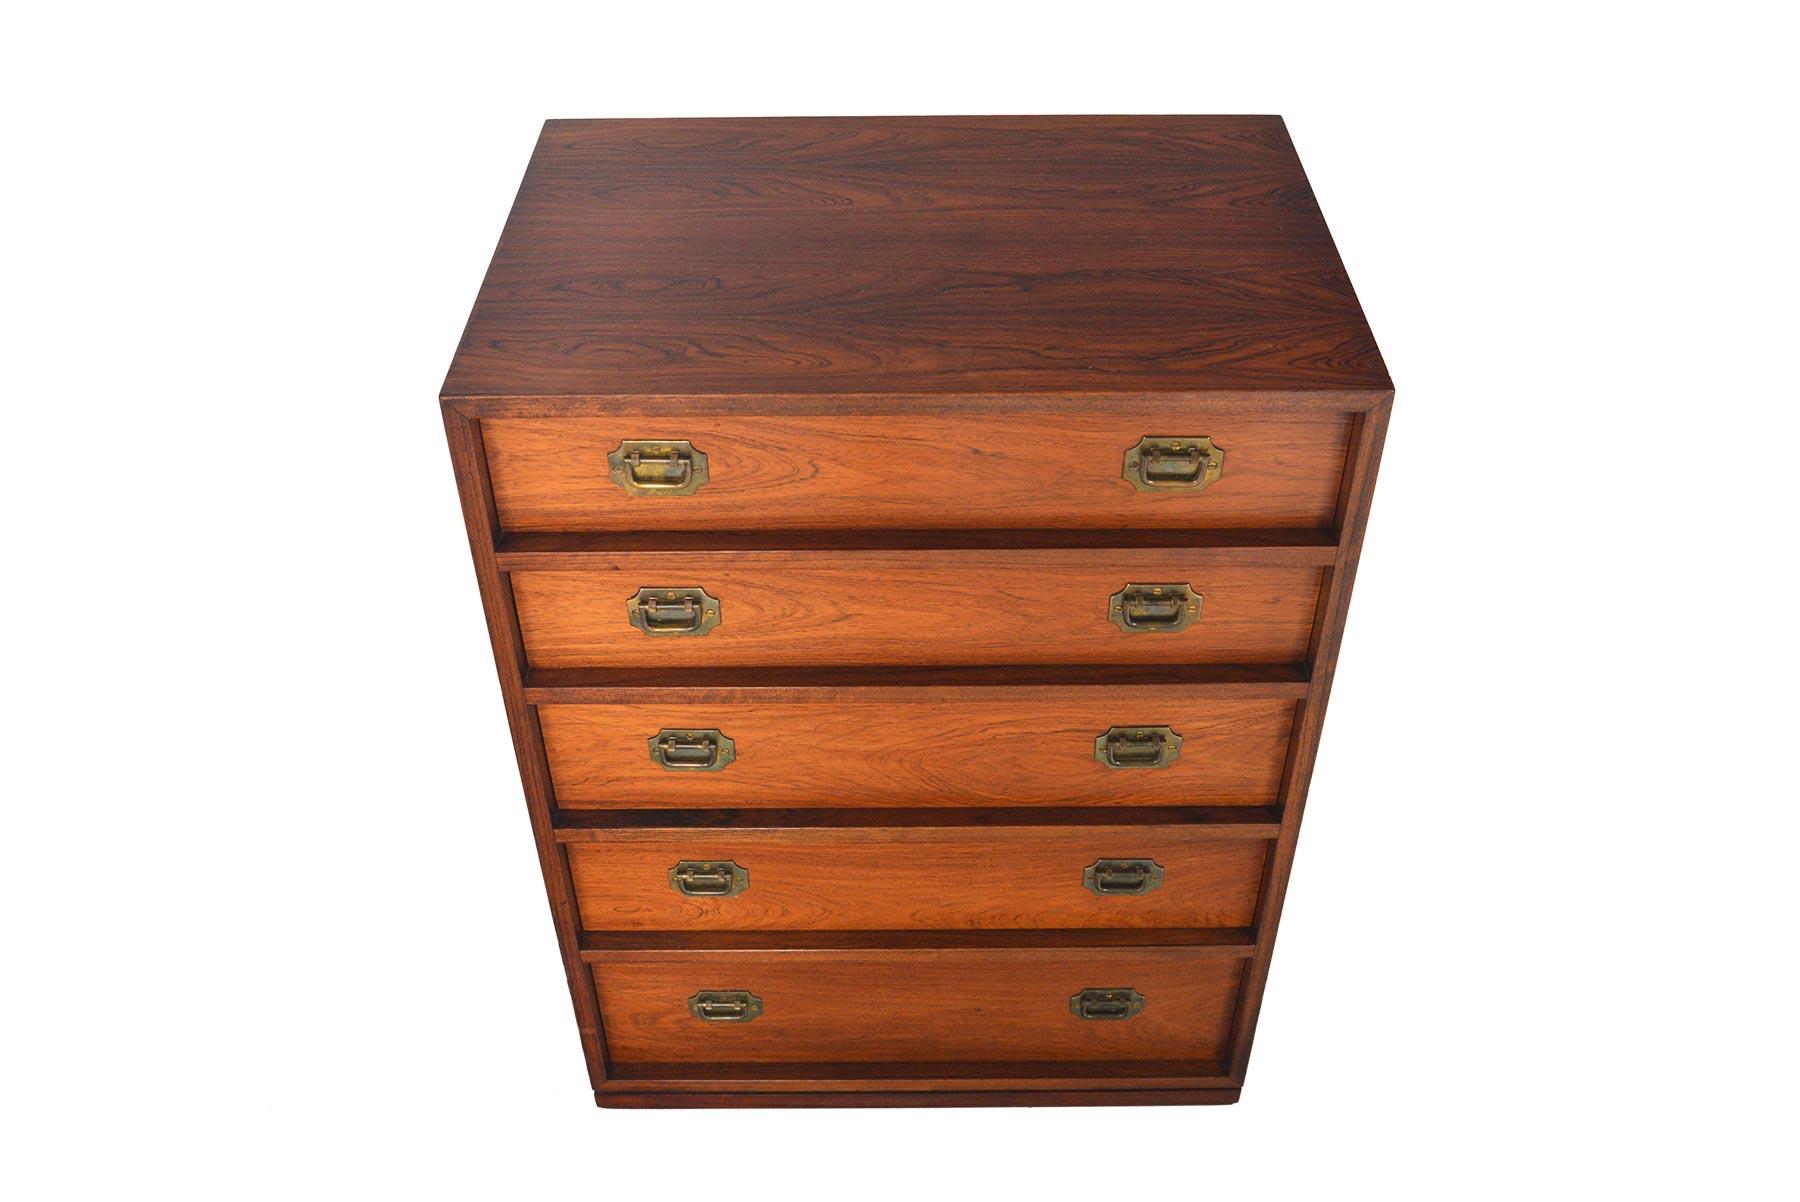 This Danish modern midcentury Brazilian rosewood jewelry chest was designed by Henning Korch for Silkeborge Møbelfabrik in the late 1960s. Beautifully detailed in the “Campaign” style, this small chest offers five drawers with brass drop- ring